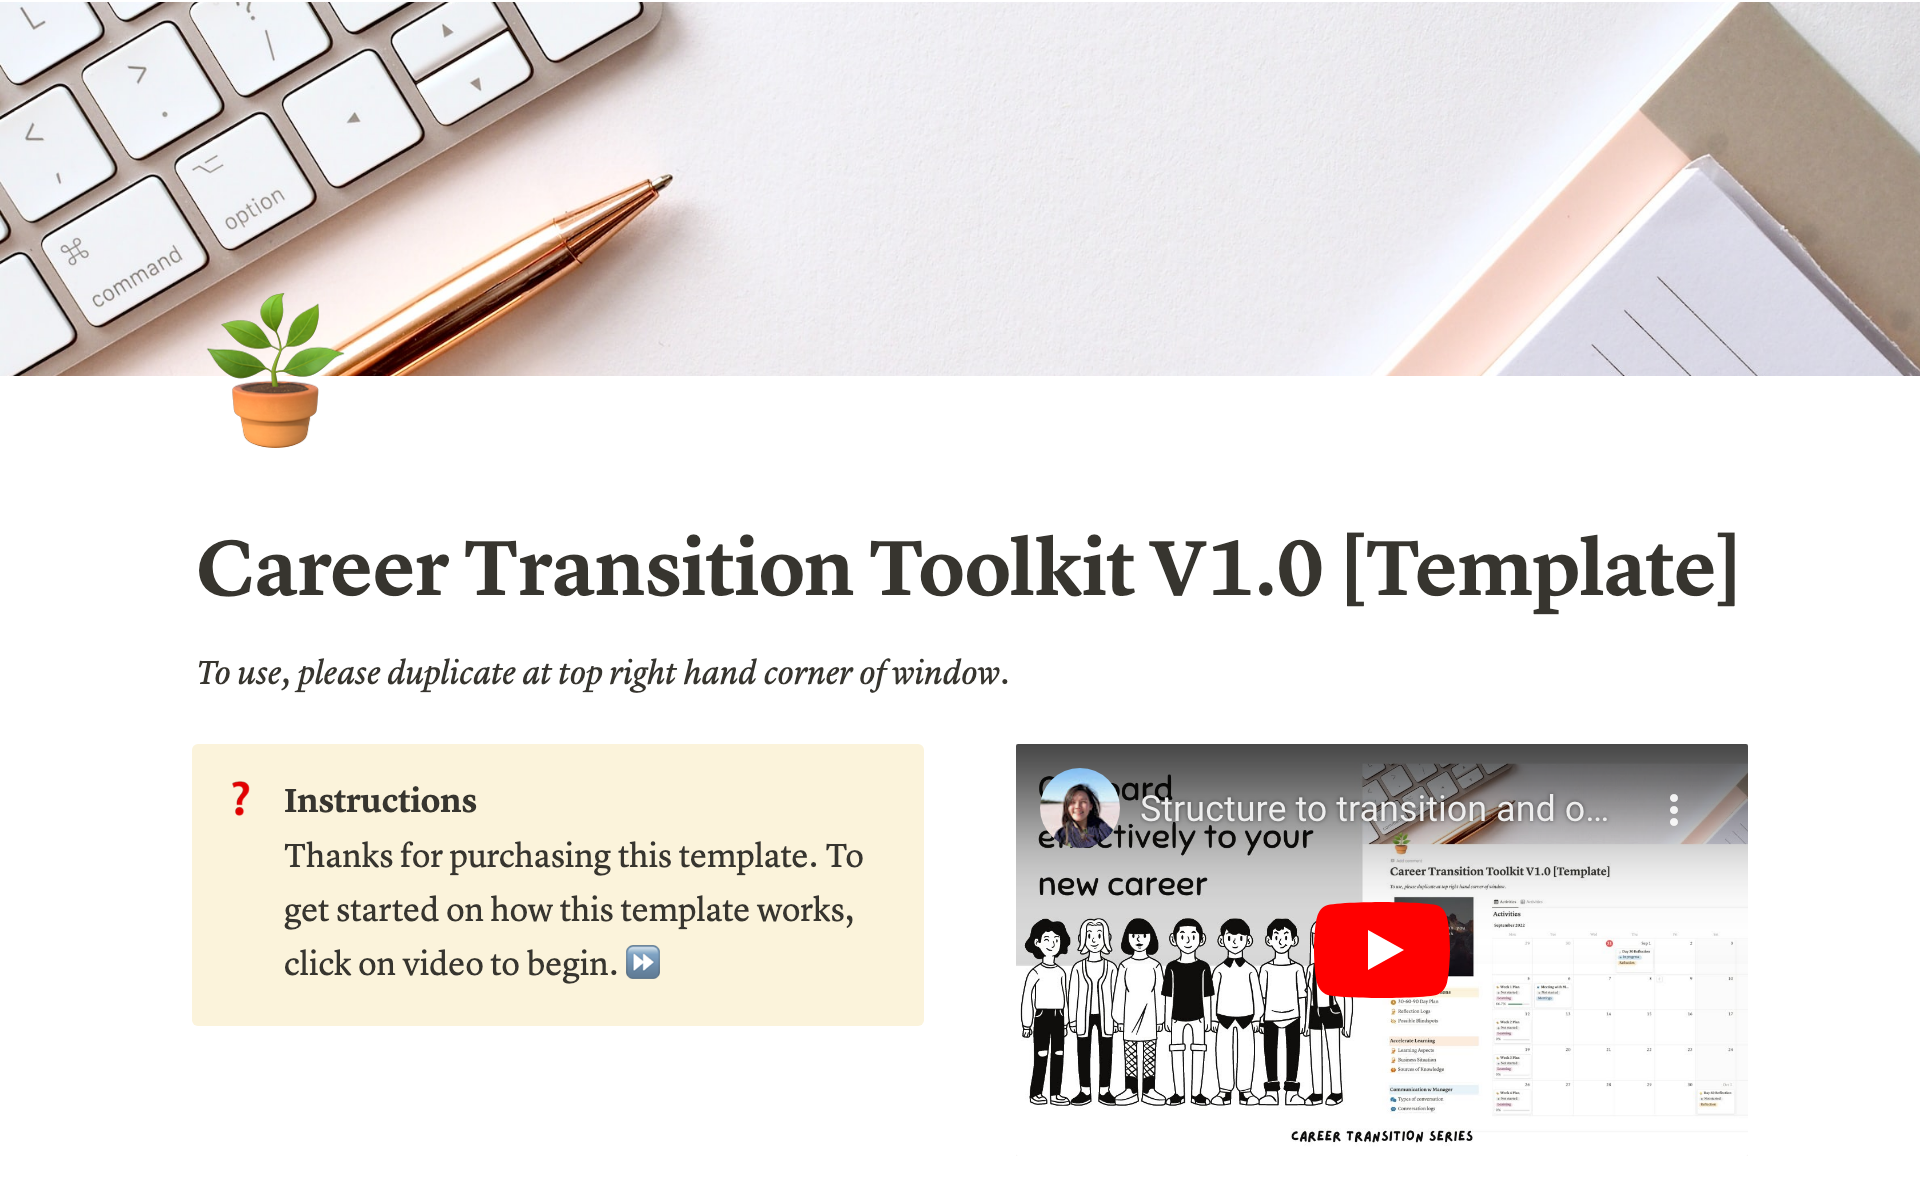 Career transition toolkit that contains resources for planning, goal setting, meetings, learning, and resources.